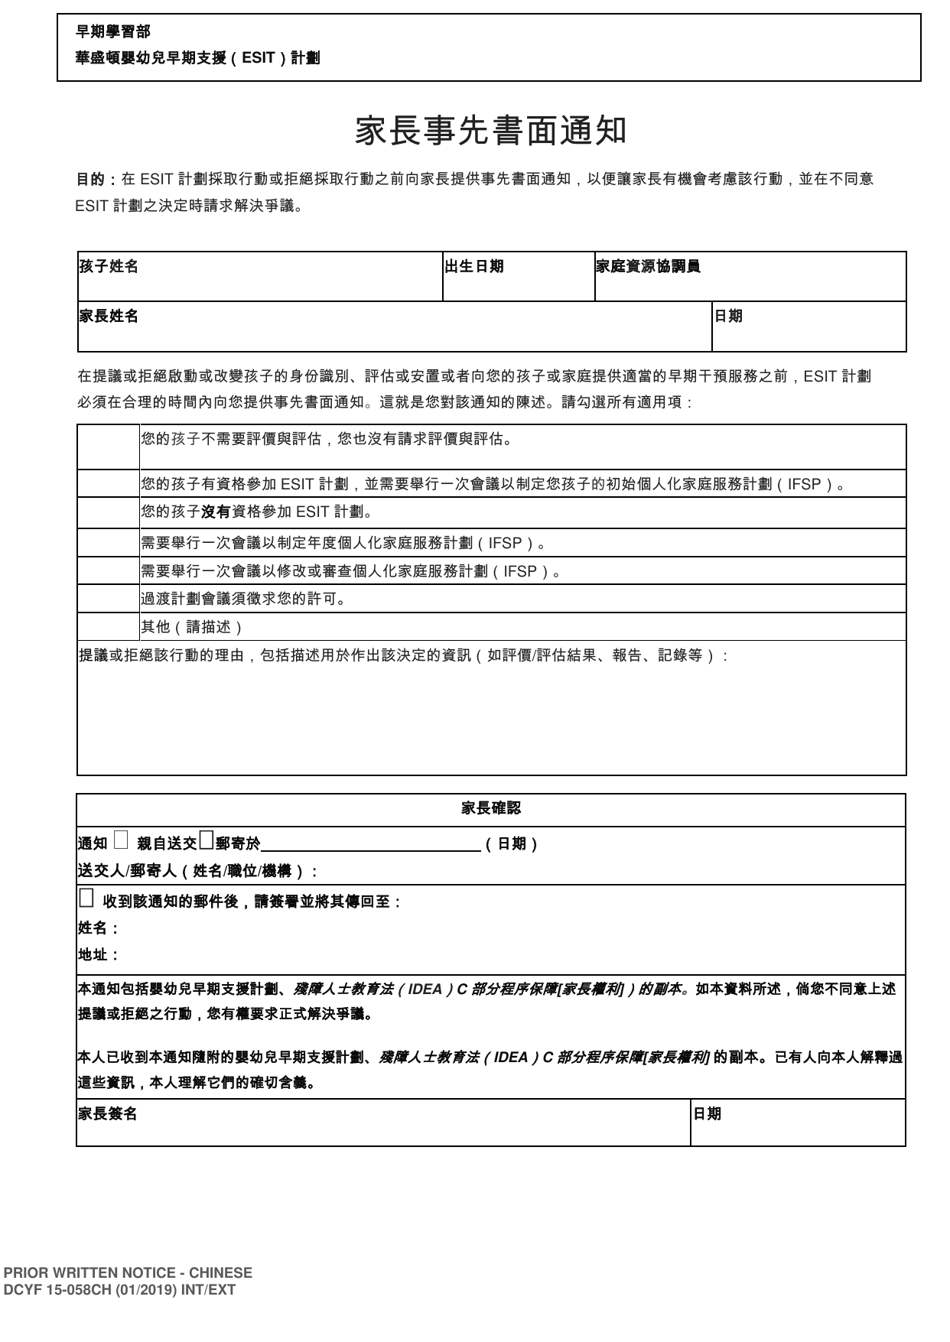 DCYF Form 15-058 Parent Prior Written Notice - Washington (Chinese), Page 1